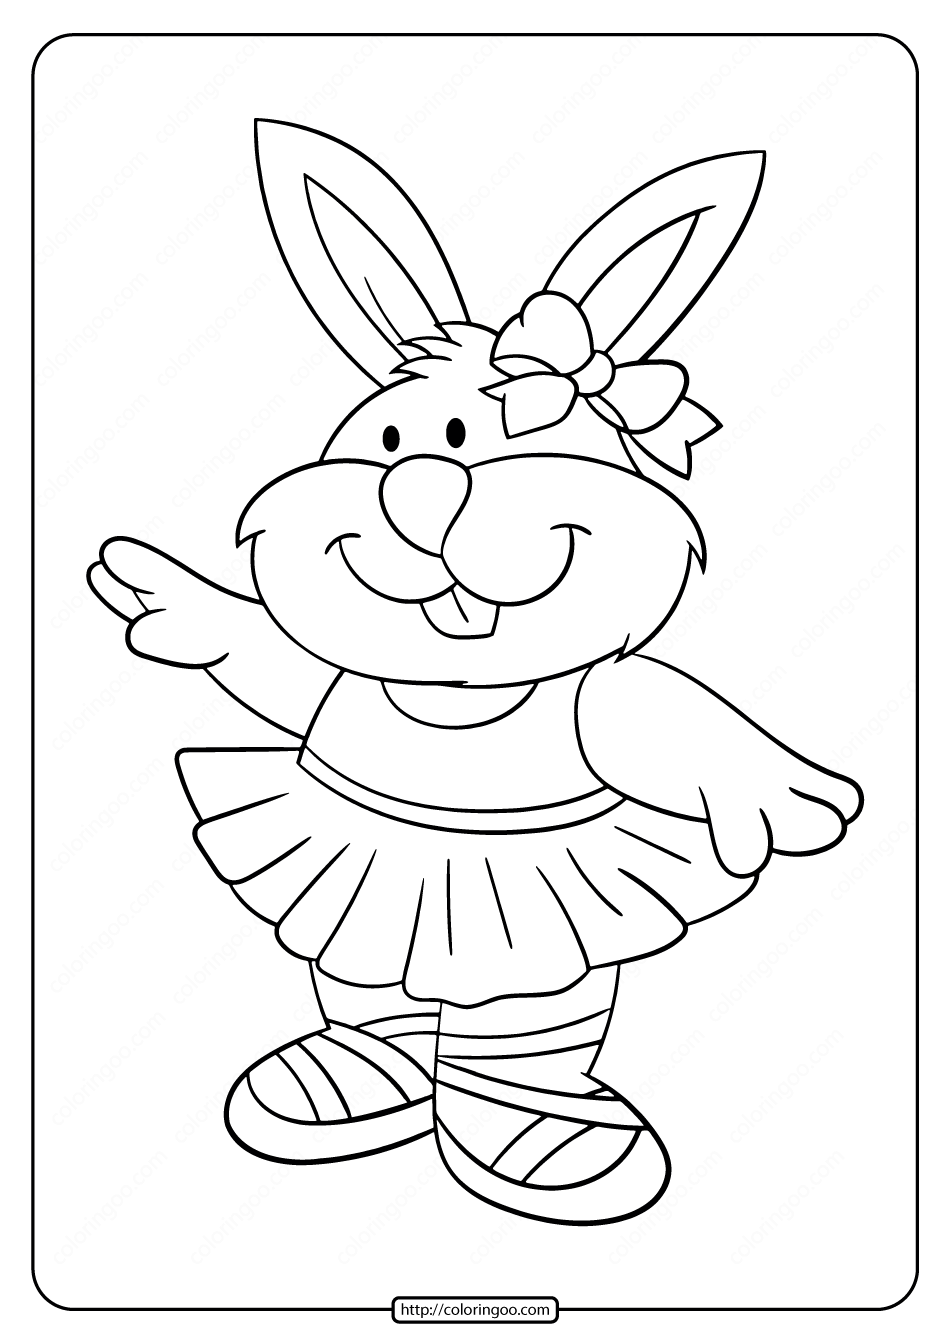 printable ballerina rabbit coloring pages